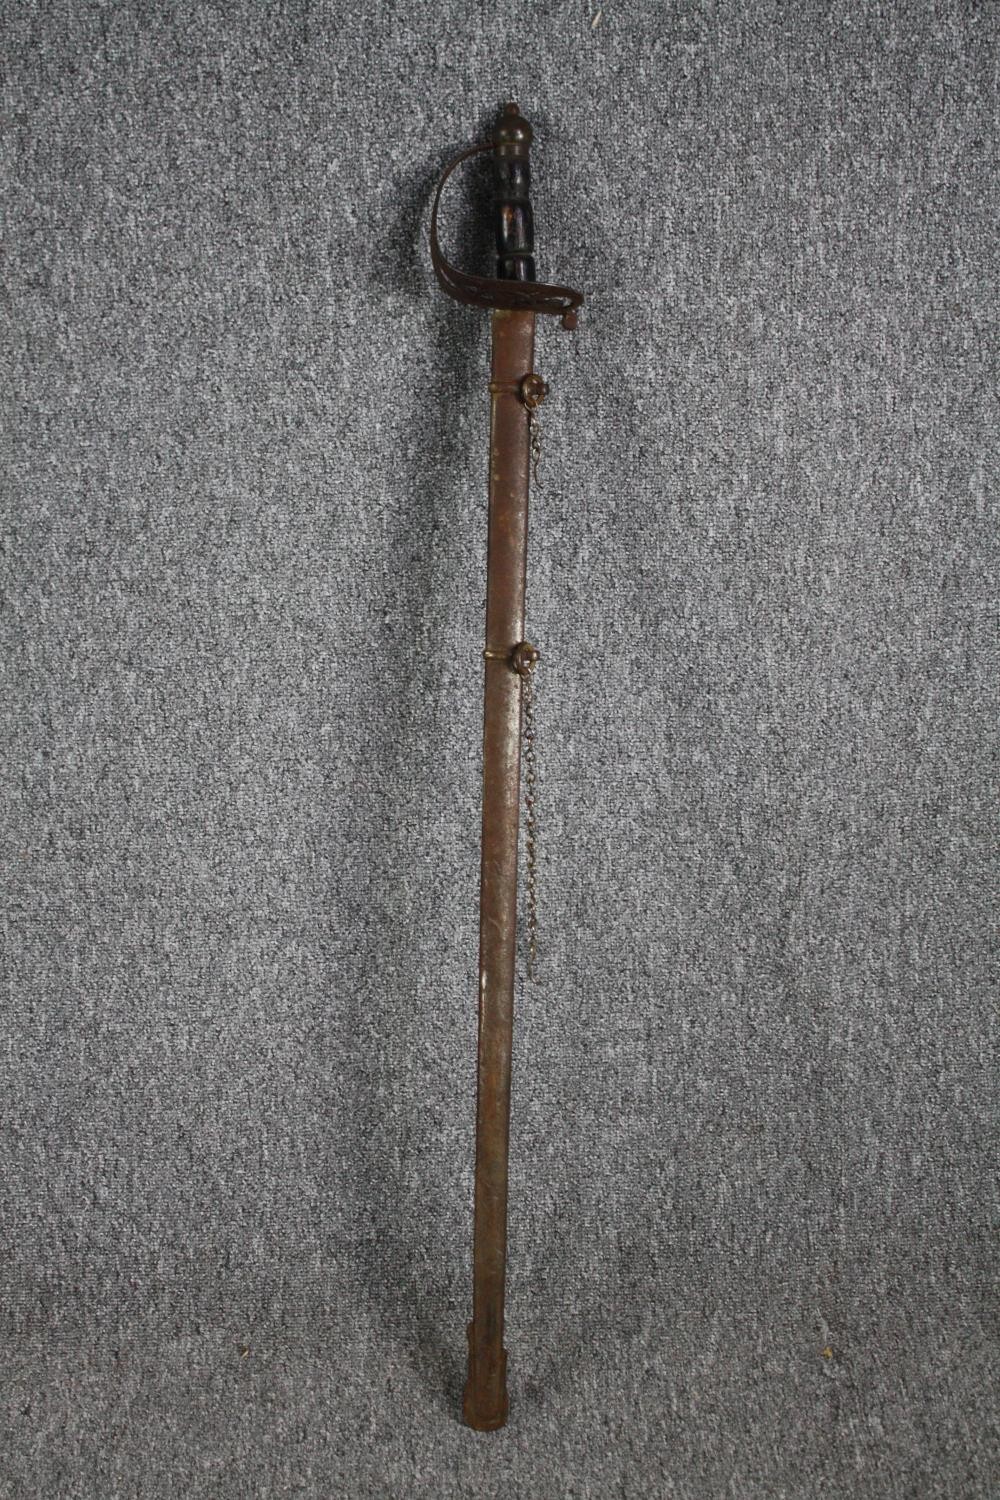 A sword and scabbard. Quite rusted and without a visible maker's mark. With a wooden handle and